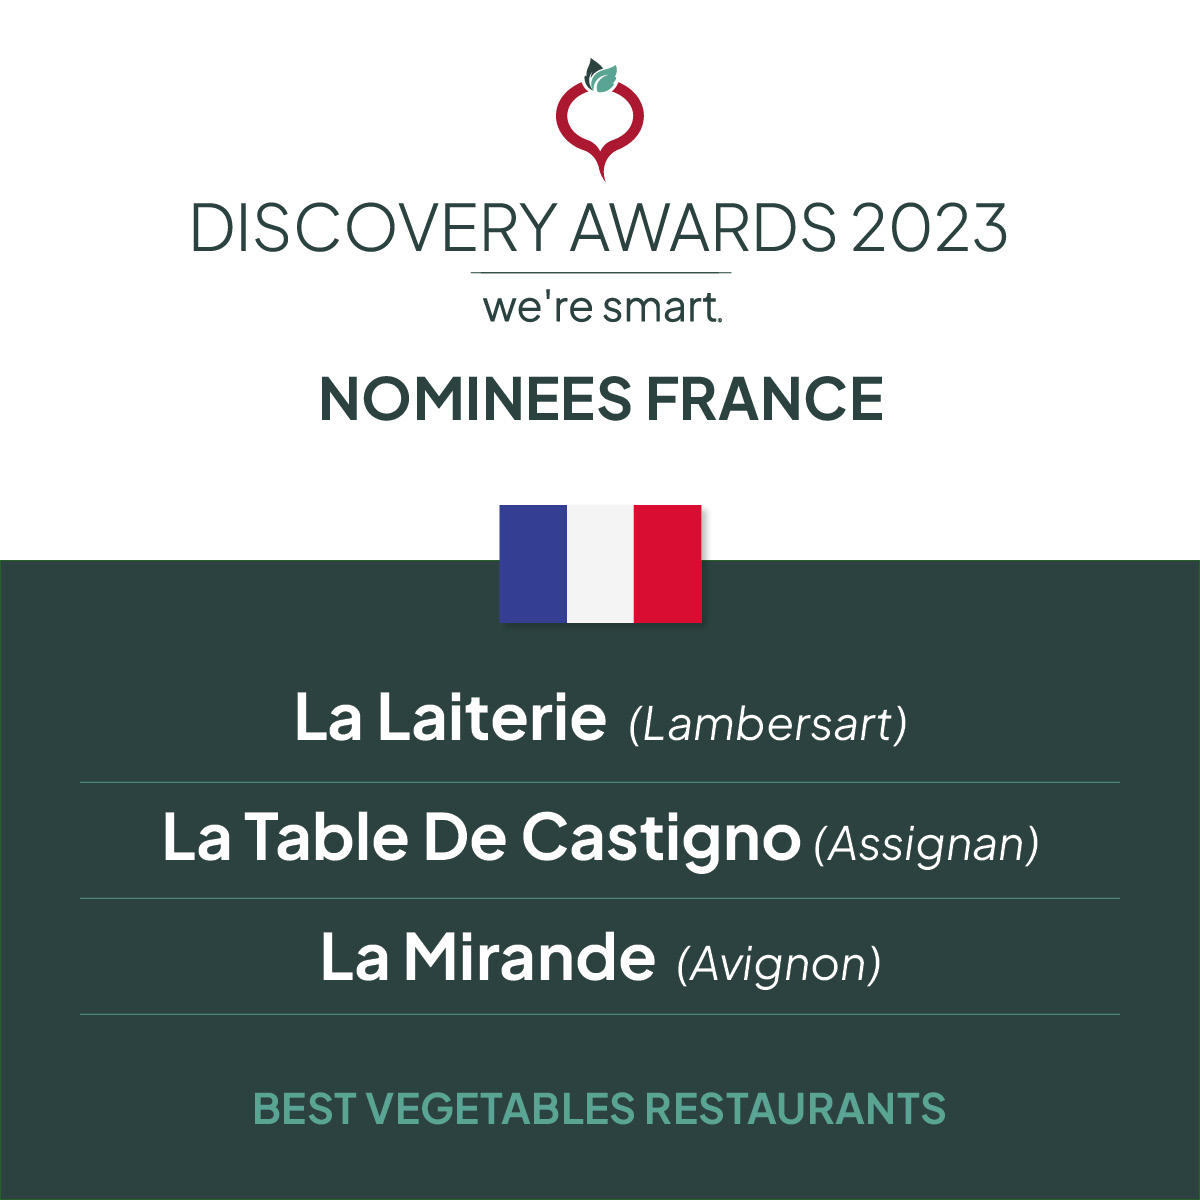 Nominees France